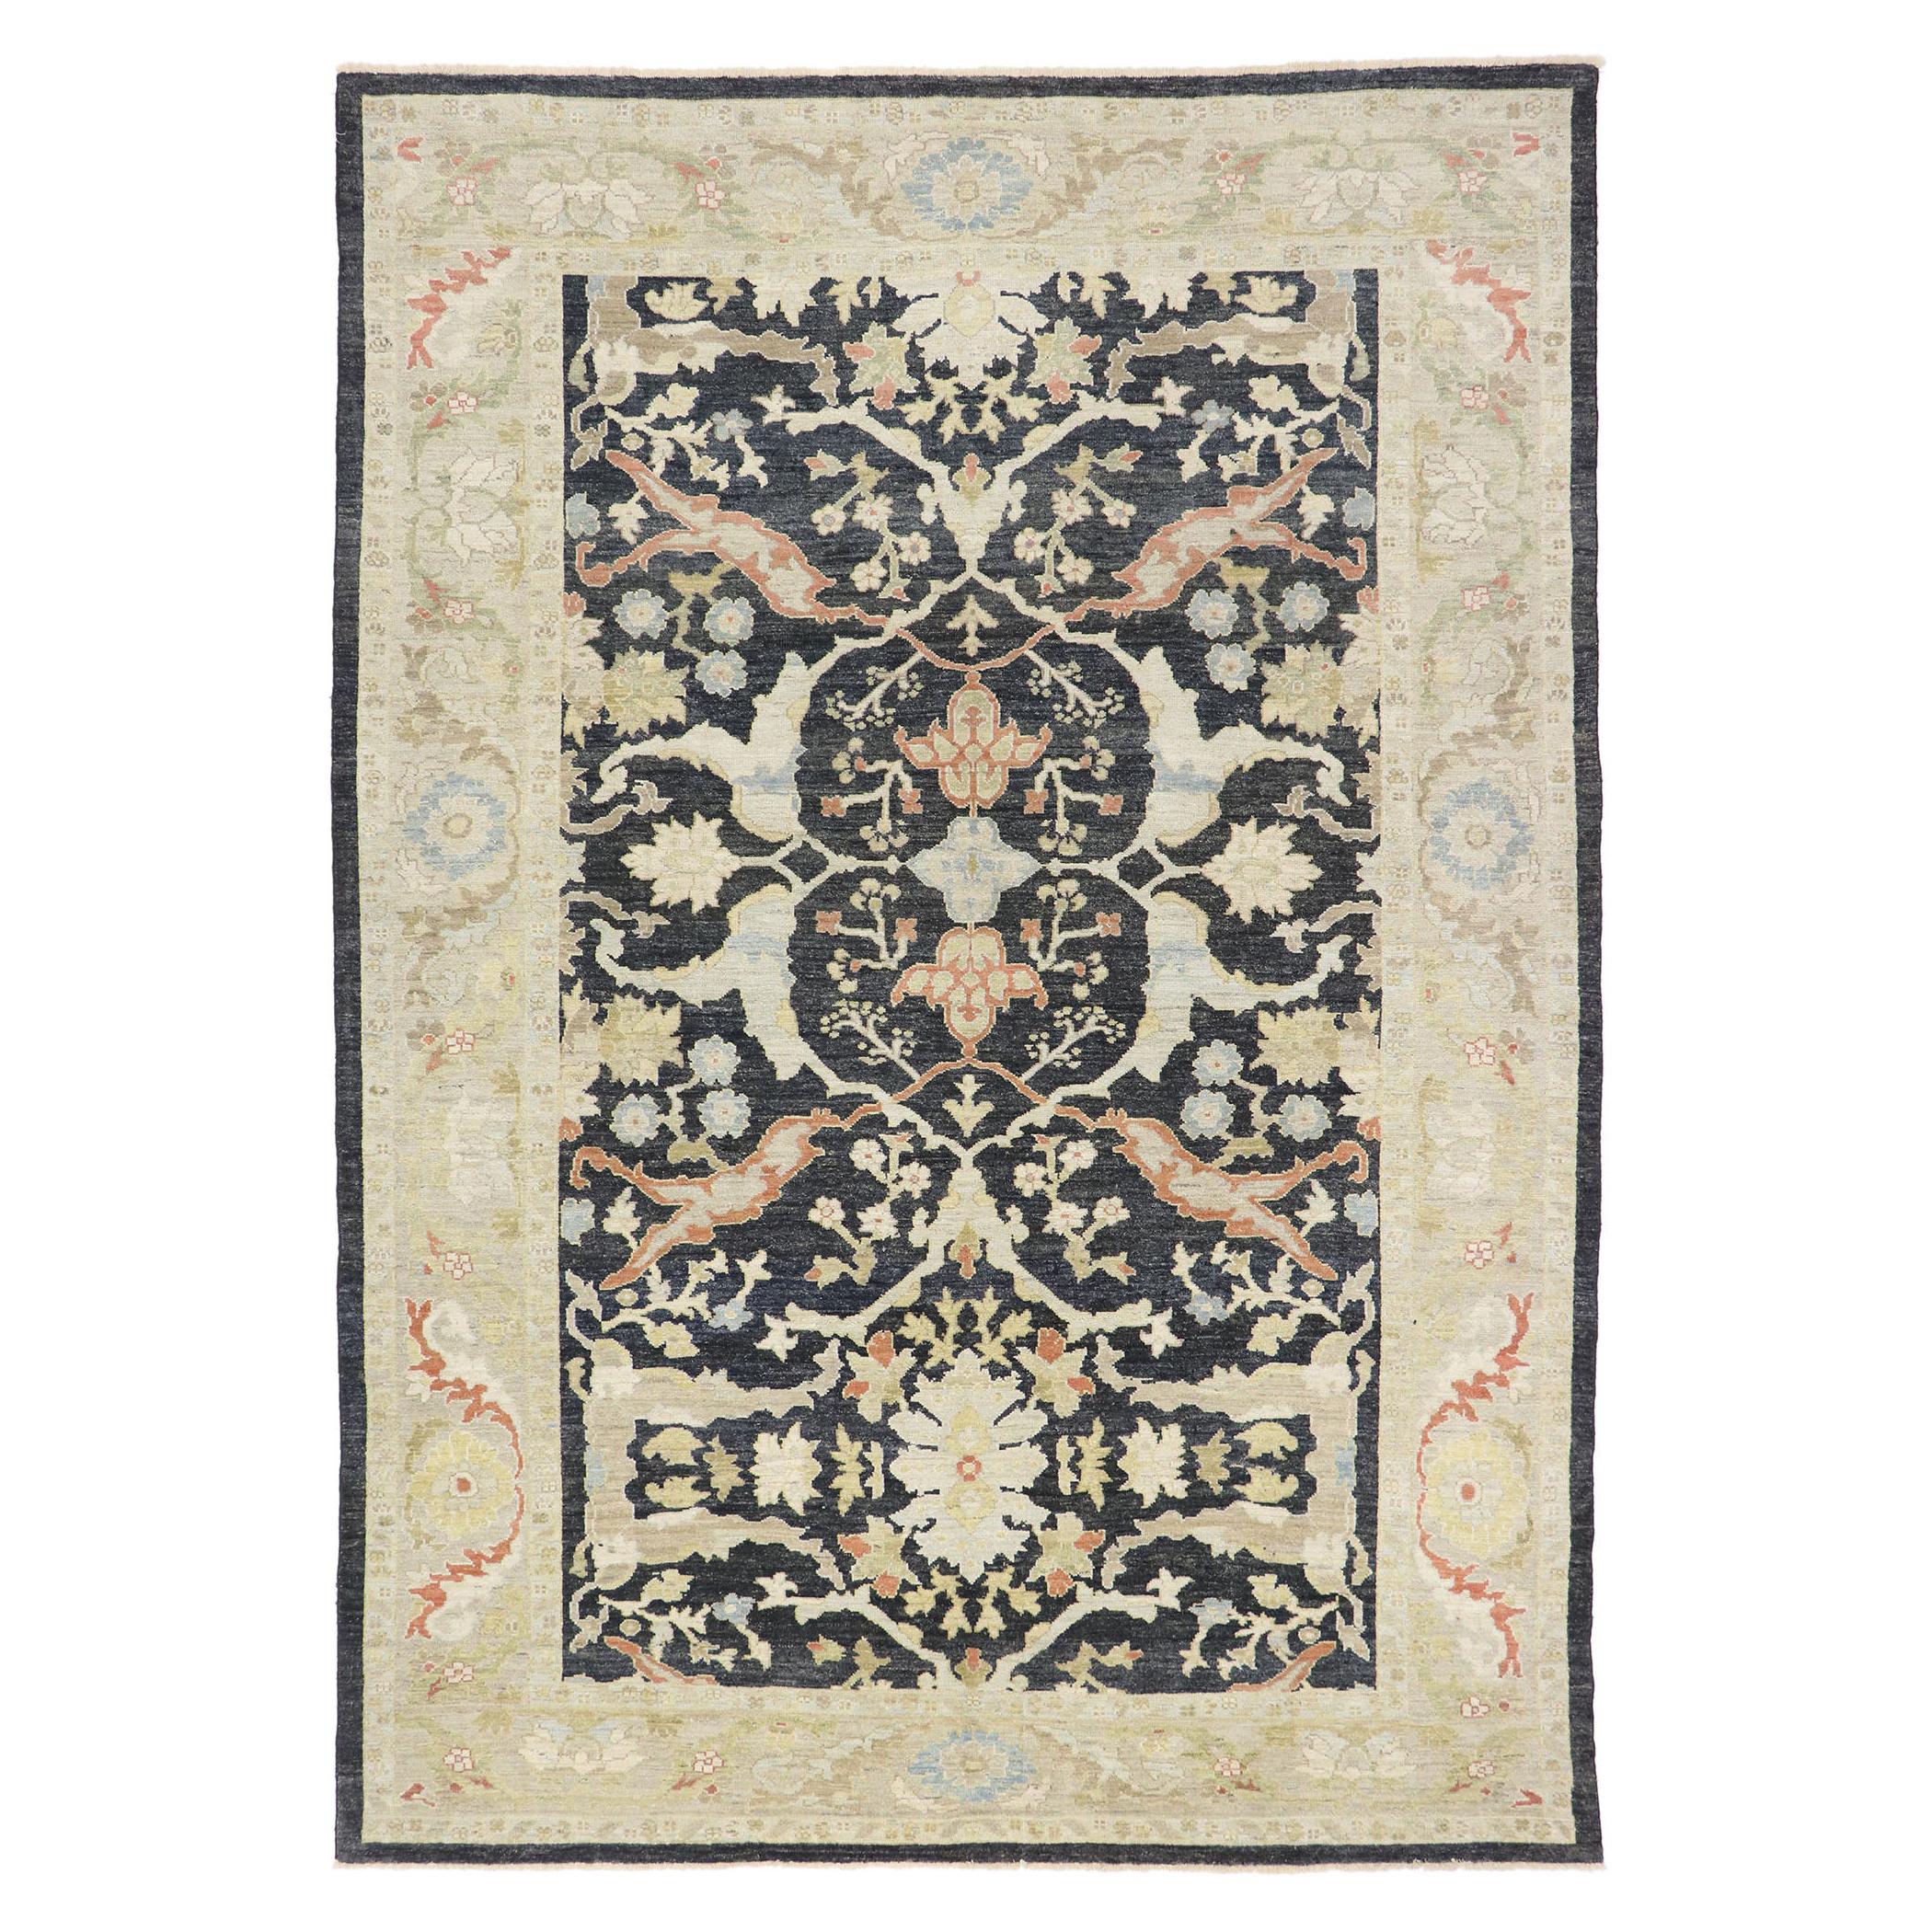 New Contemporary Persian Sultanabad Rug with Modern Parisian Style